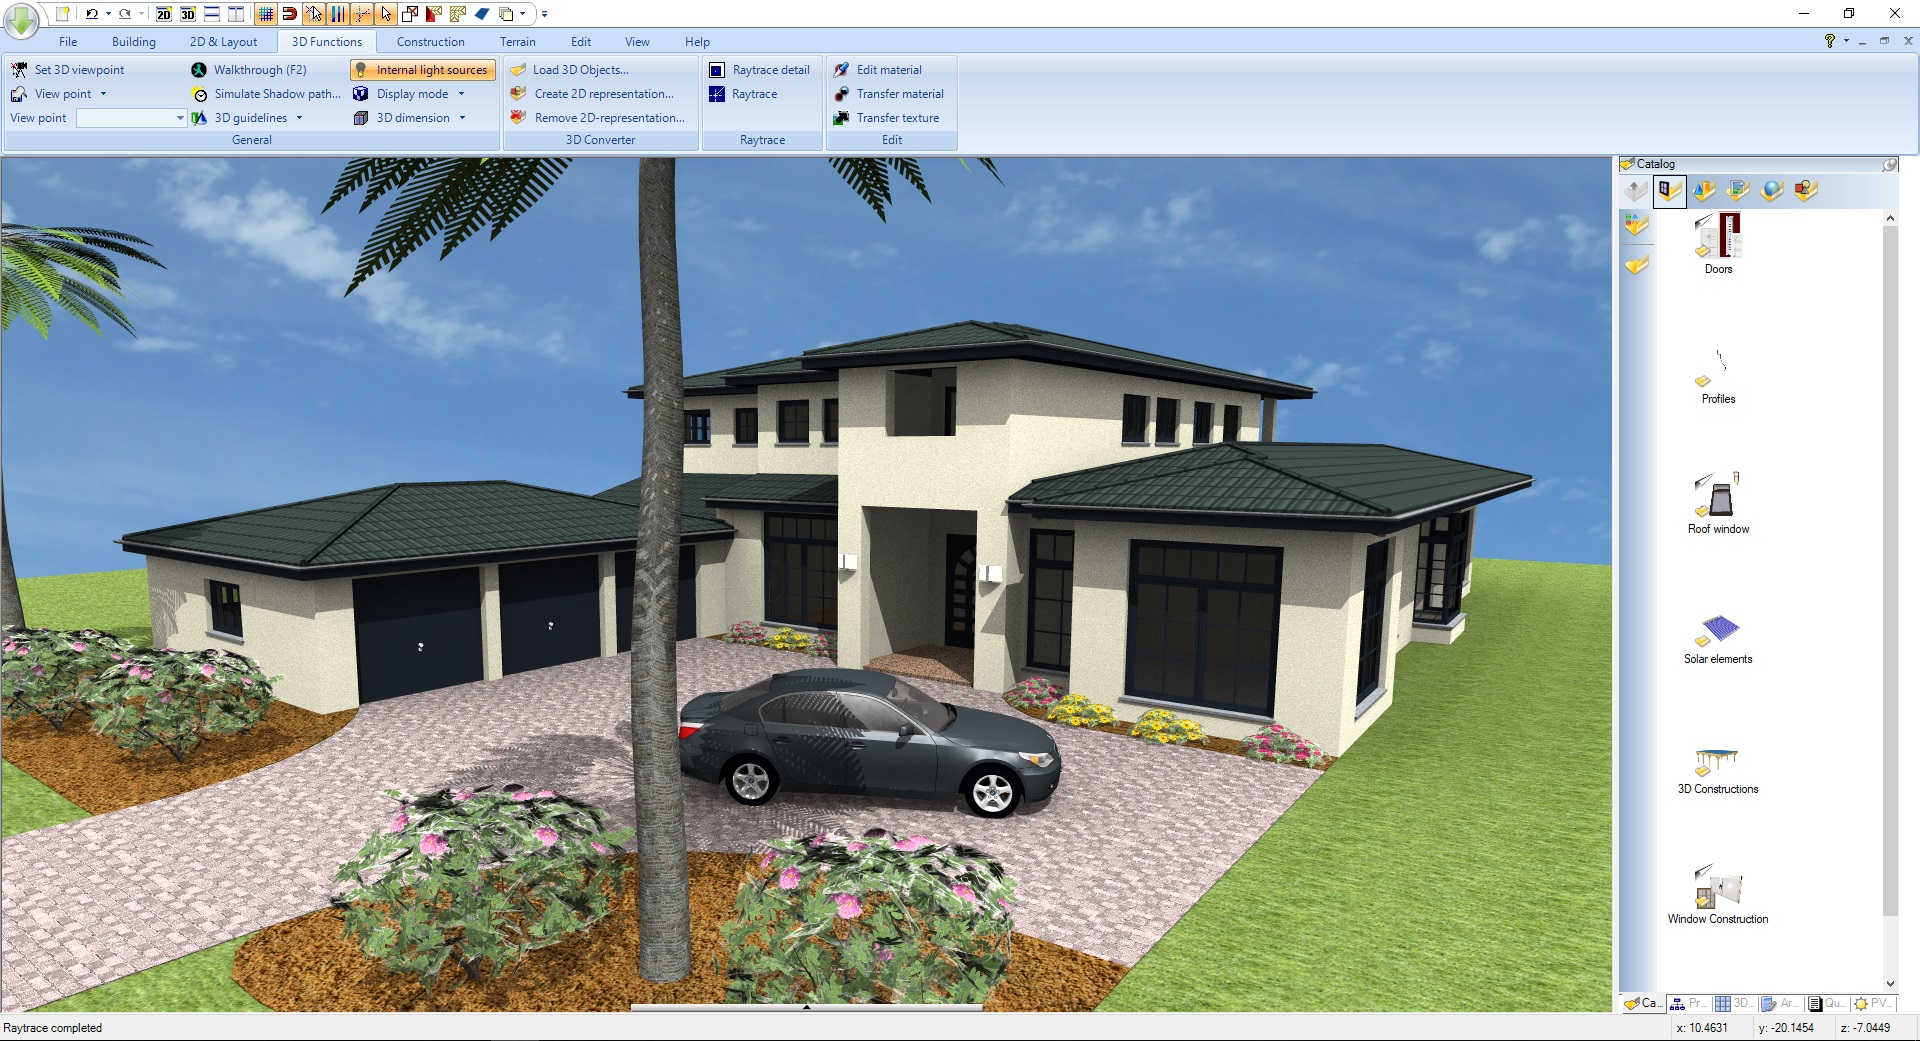 Home Architect - Design your floor plans in 3D - Ultimate Edition screenshot